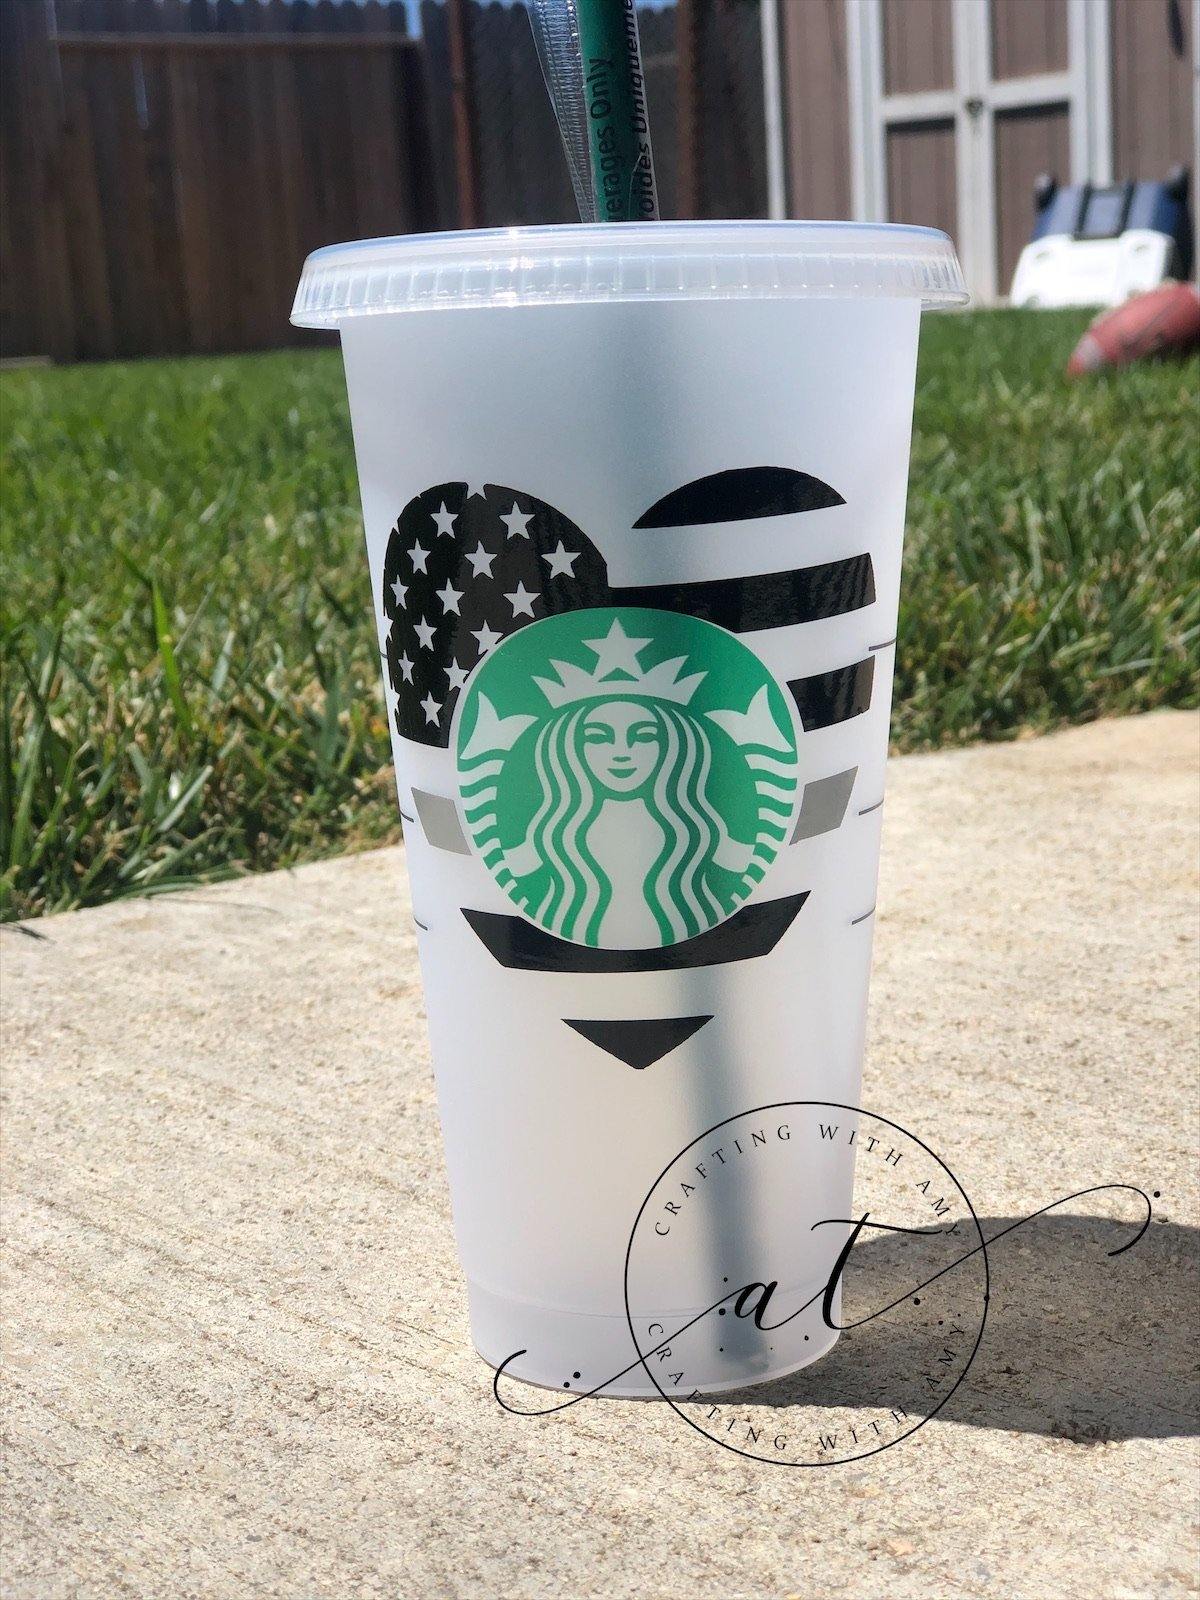 Thin Grey Line Cold Cup, Starbucks reusable cold cup, cold cup, thin blue line, thin grey line, thin yellow line, freeshipping - CraftingwithAmy